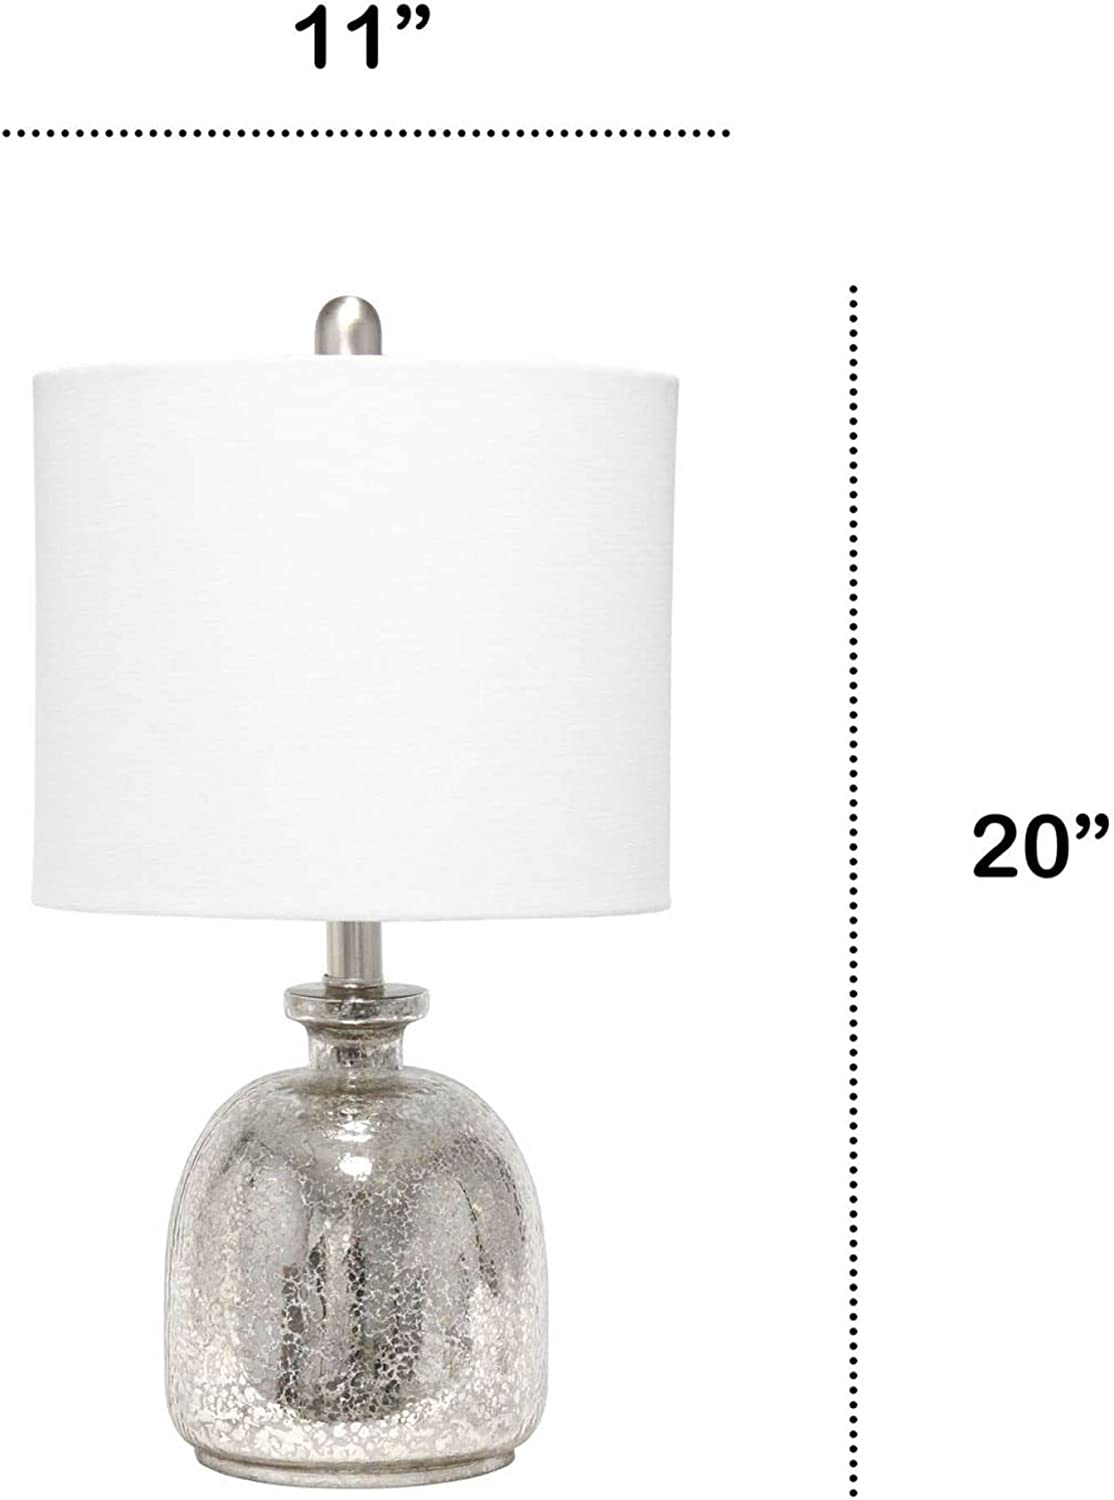 Lalia Home Contemporary Mercury Hammered Glass Jar Table Lamp with White Linen Shade